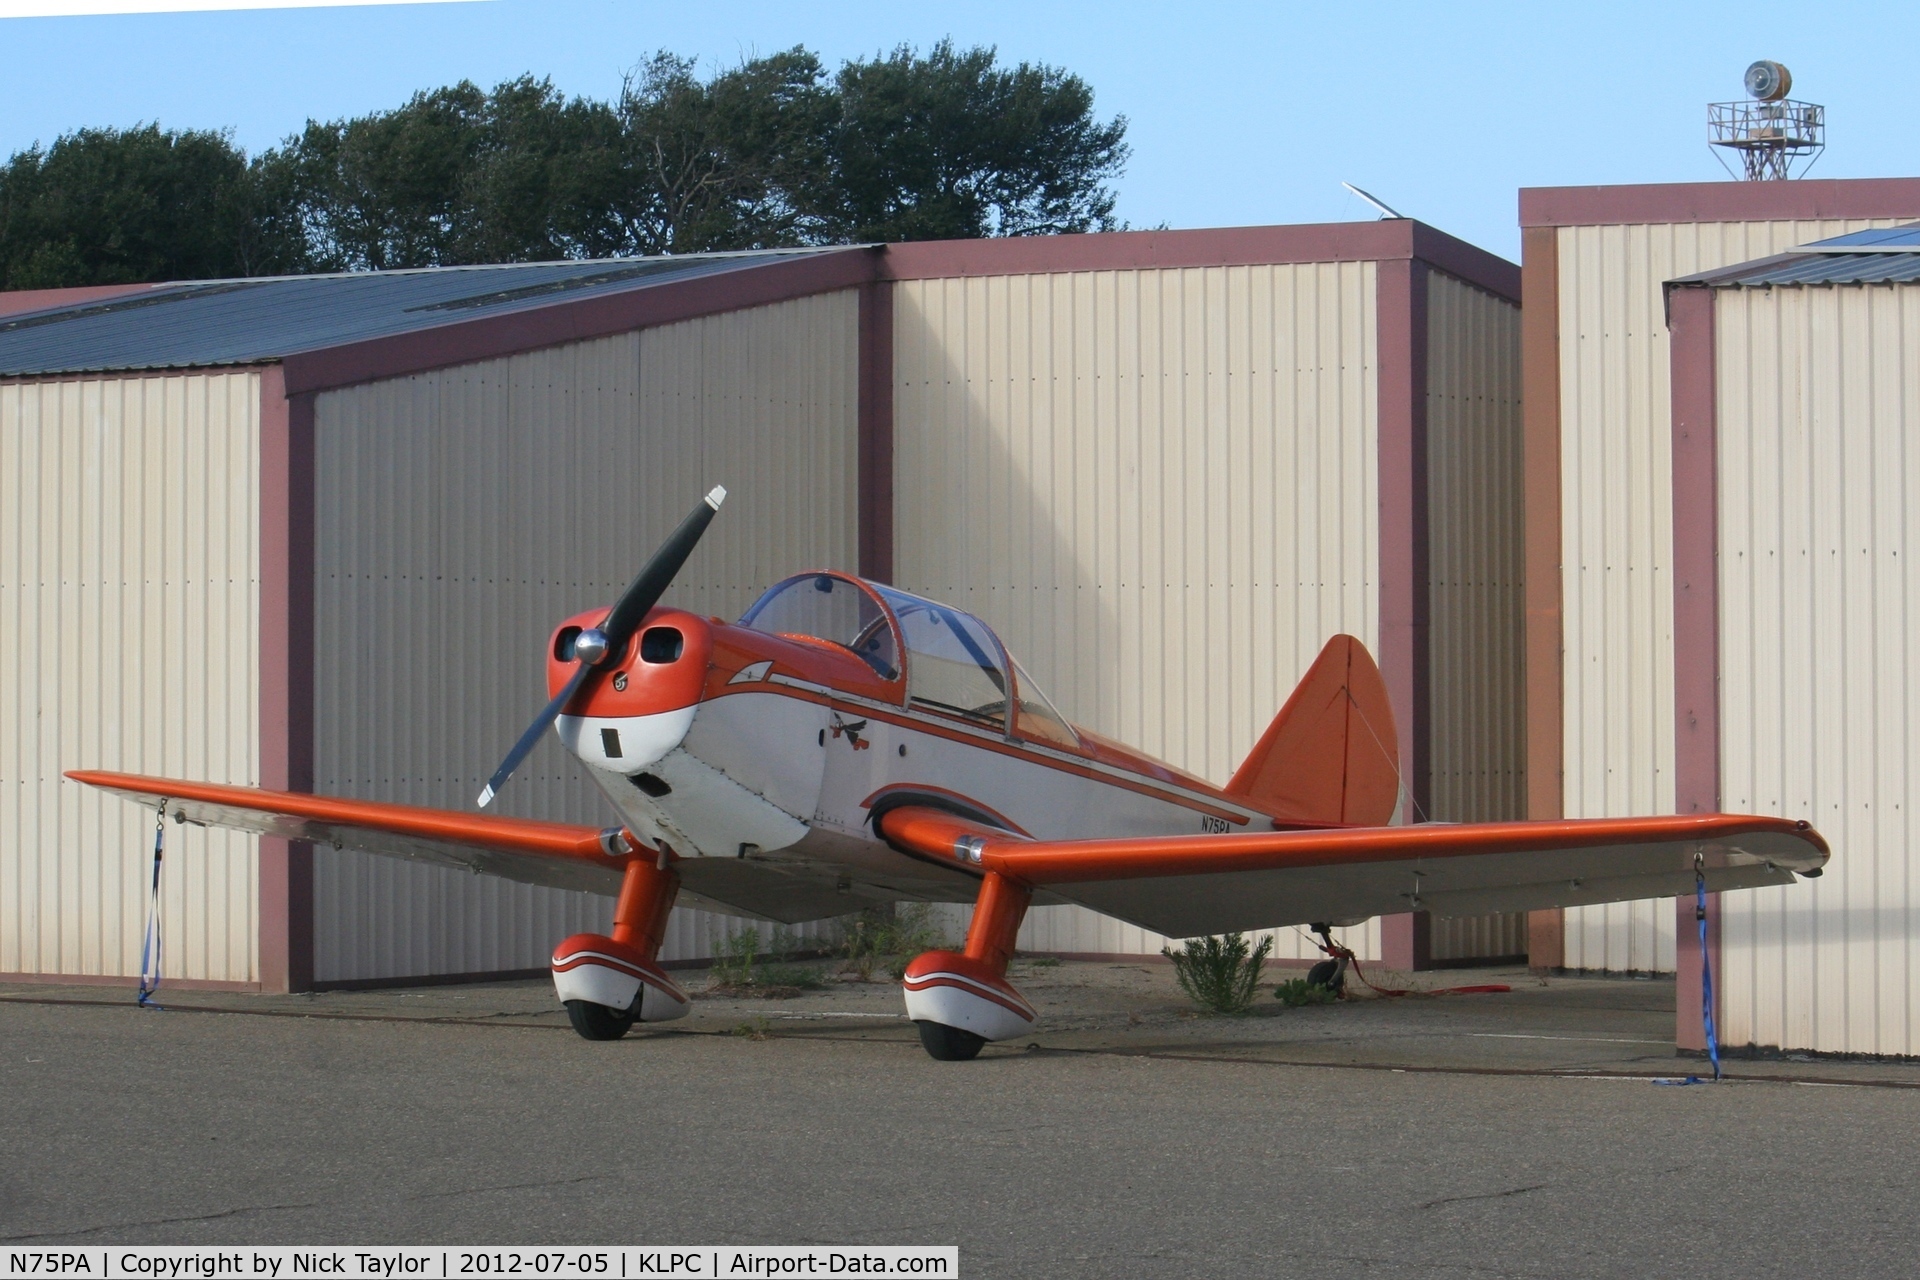 N75PA, 1975 Bowers Model 4 C/N 4-1, Parked at Lompoc